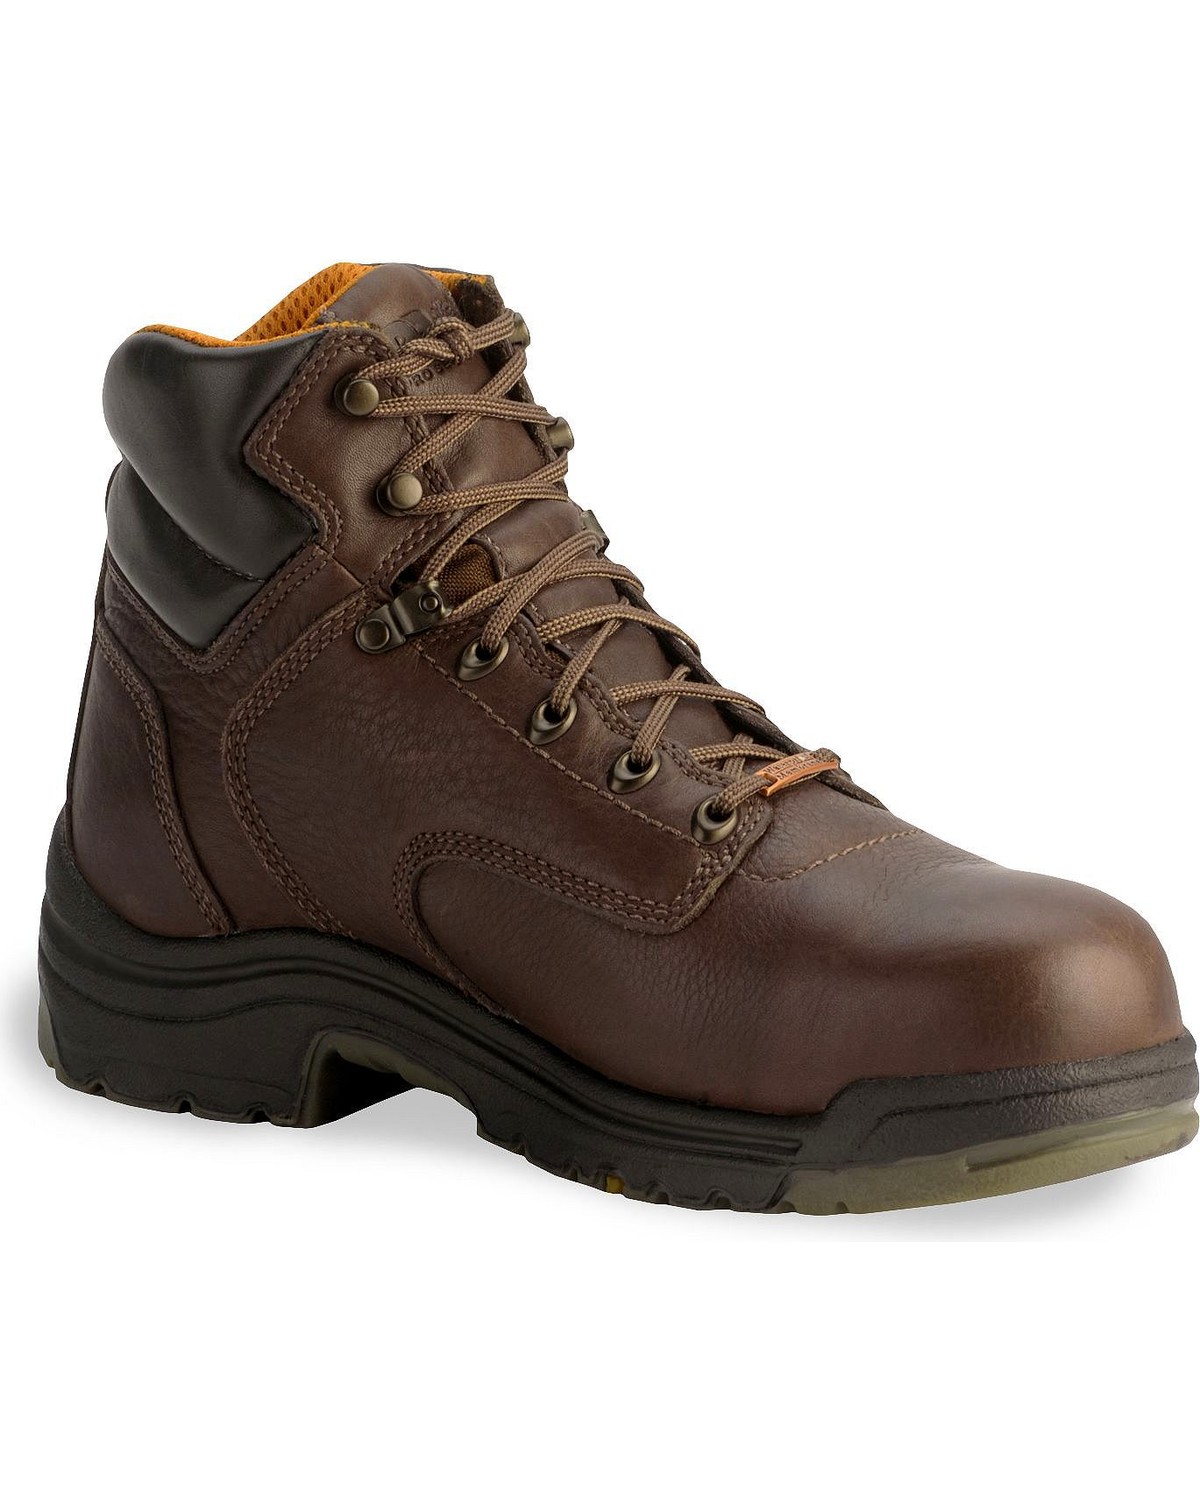 Timberland Pro 6" Waterproof TiTAN Boots - Composition Toe